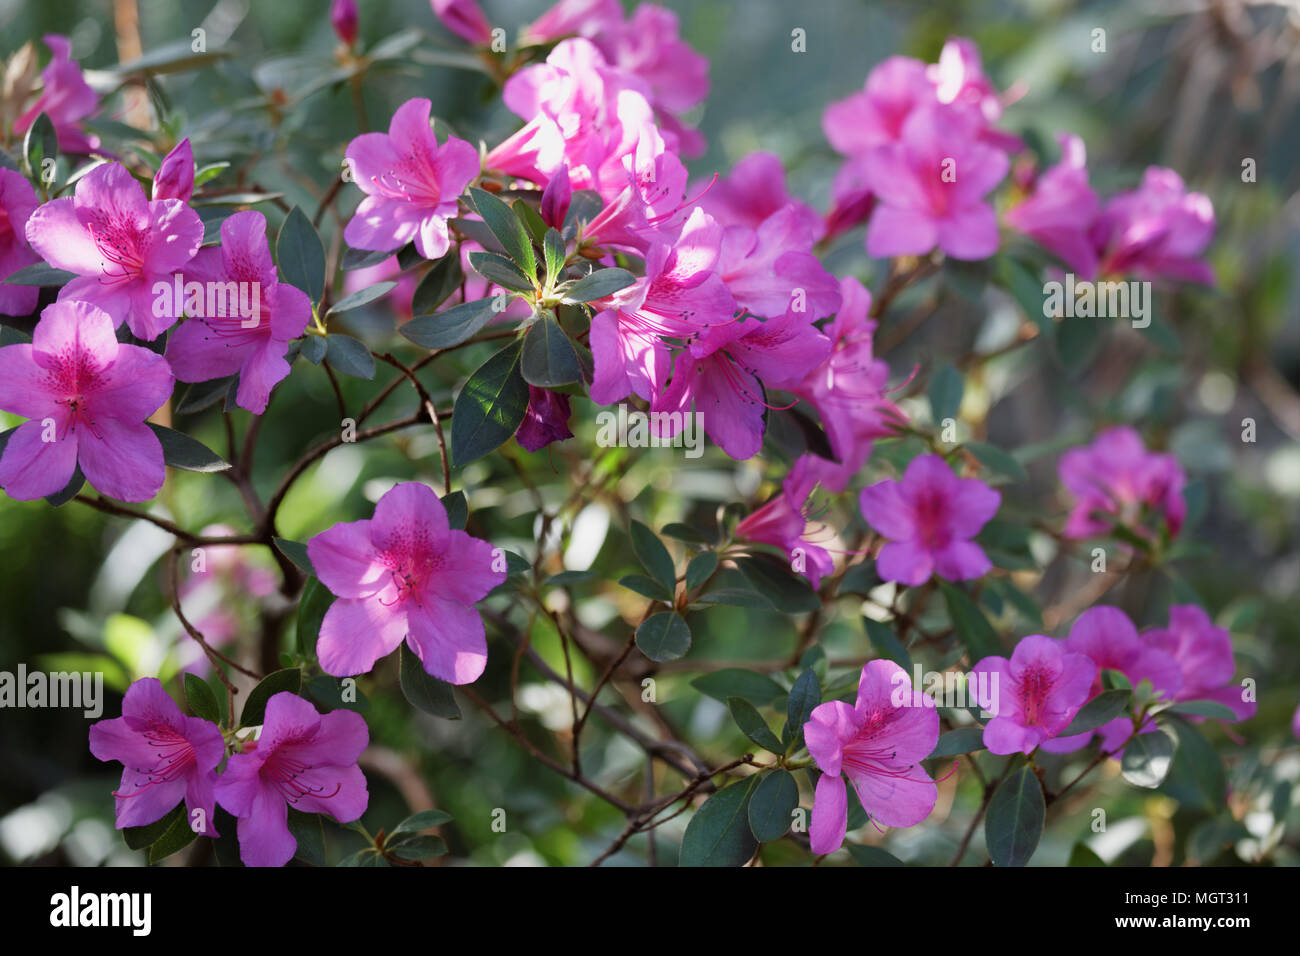 Blooming Rhododendron in a garden Stock Photo